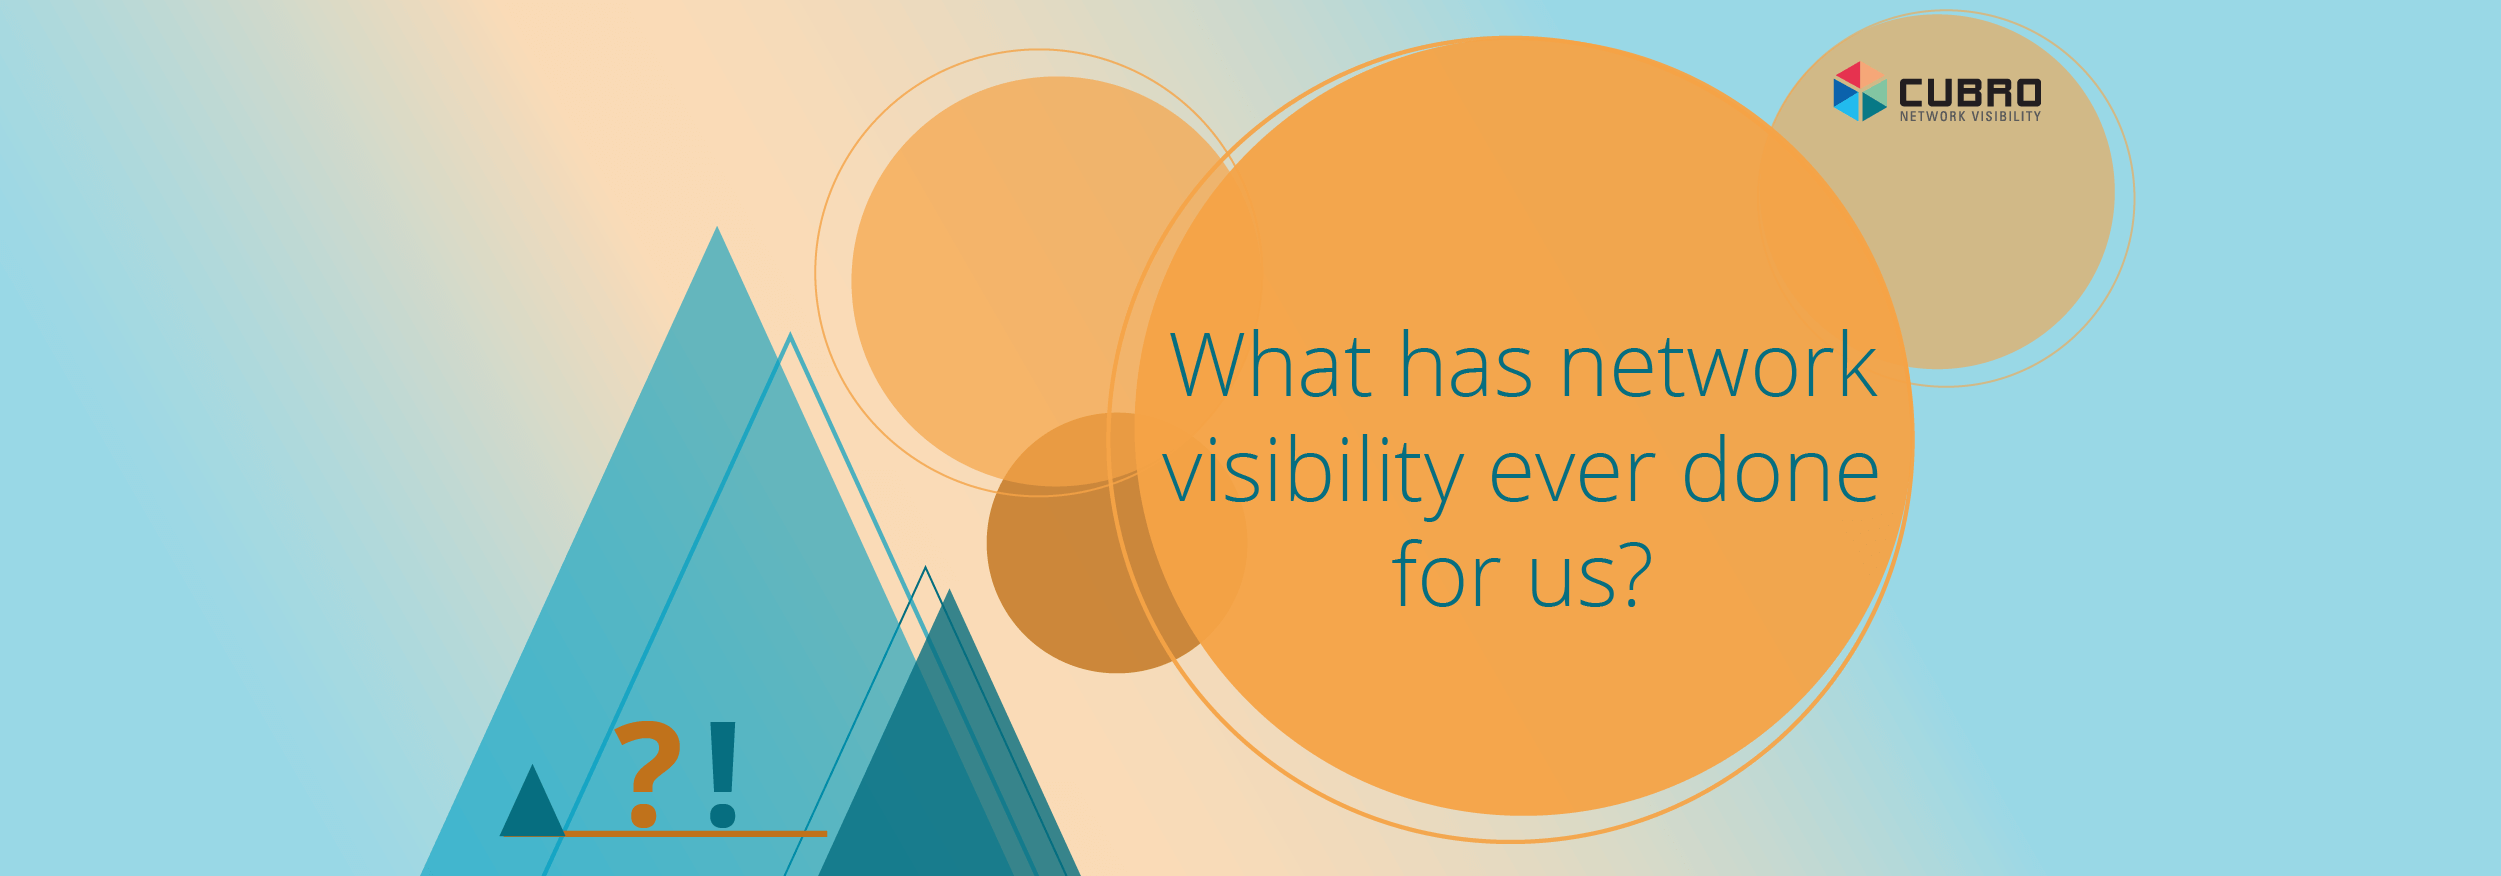 Graphic for blog post of network visibility and what it has done for us